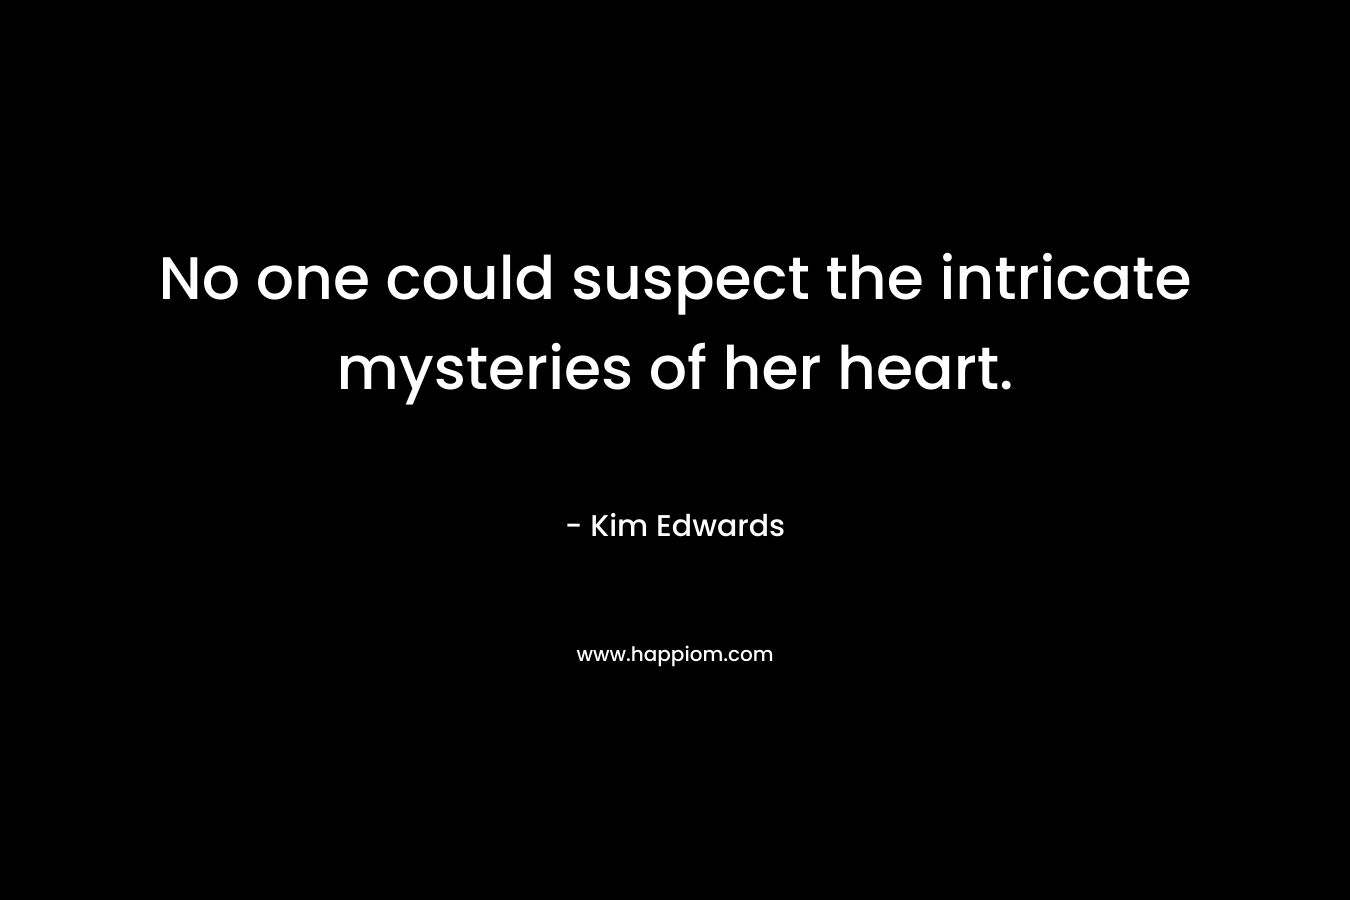 No one could suspect the intricate mysteries of her heart.